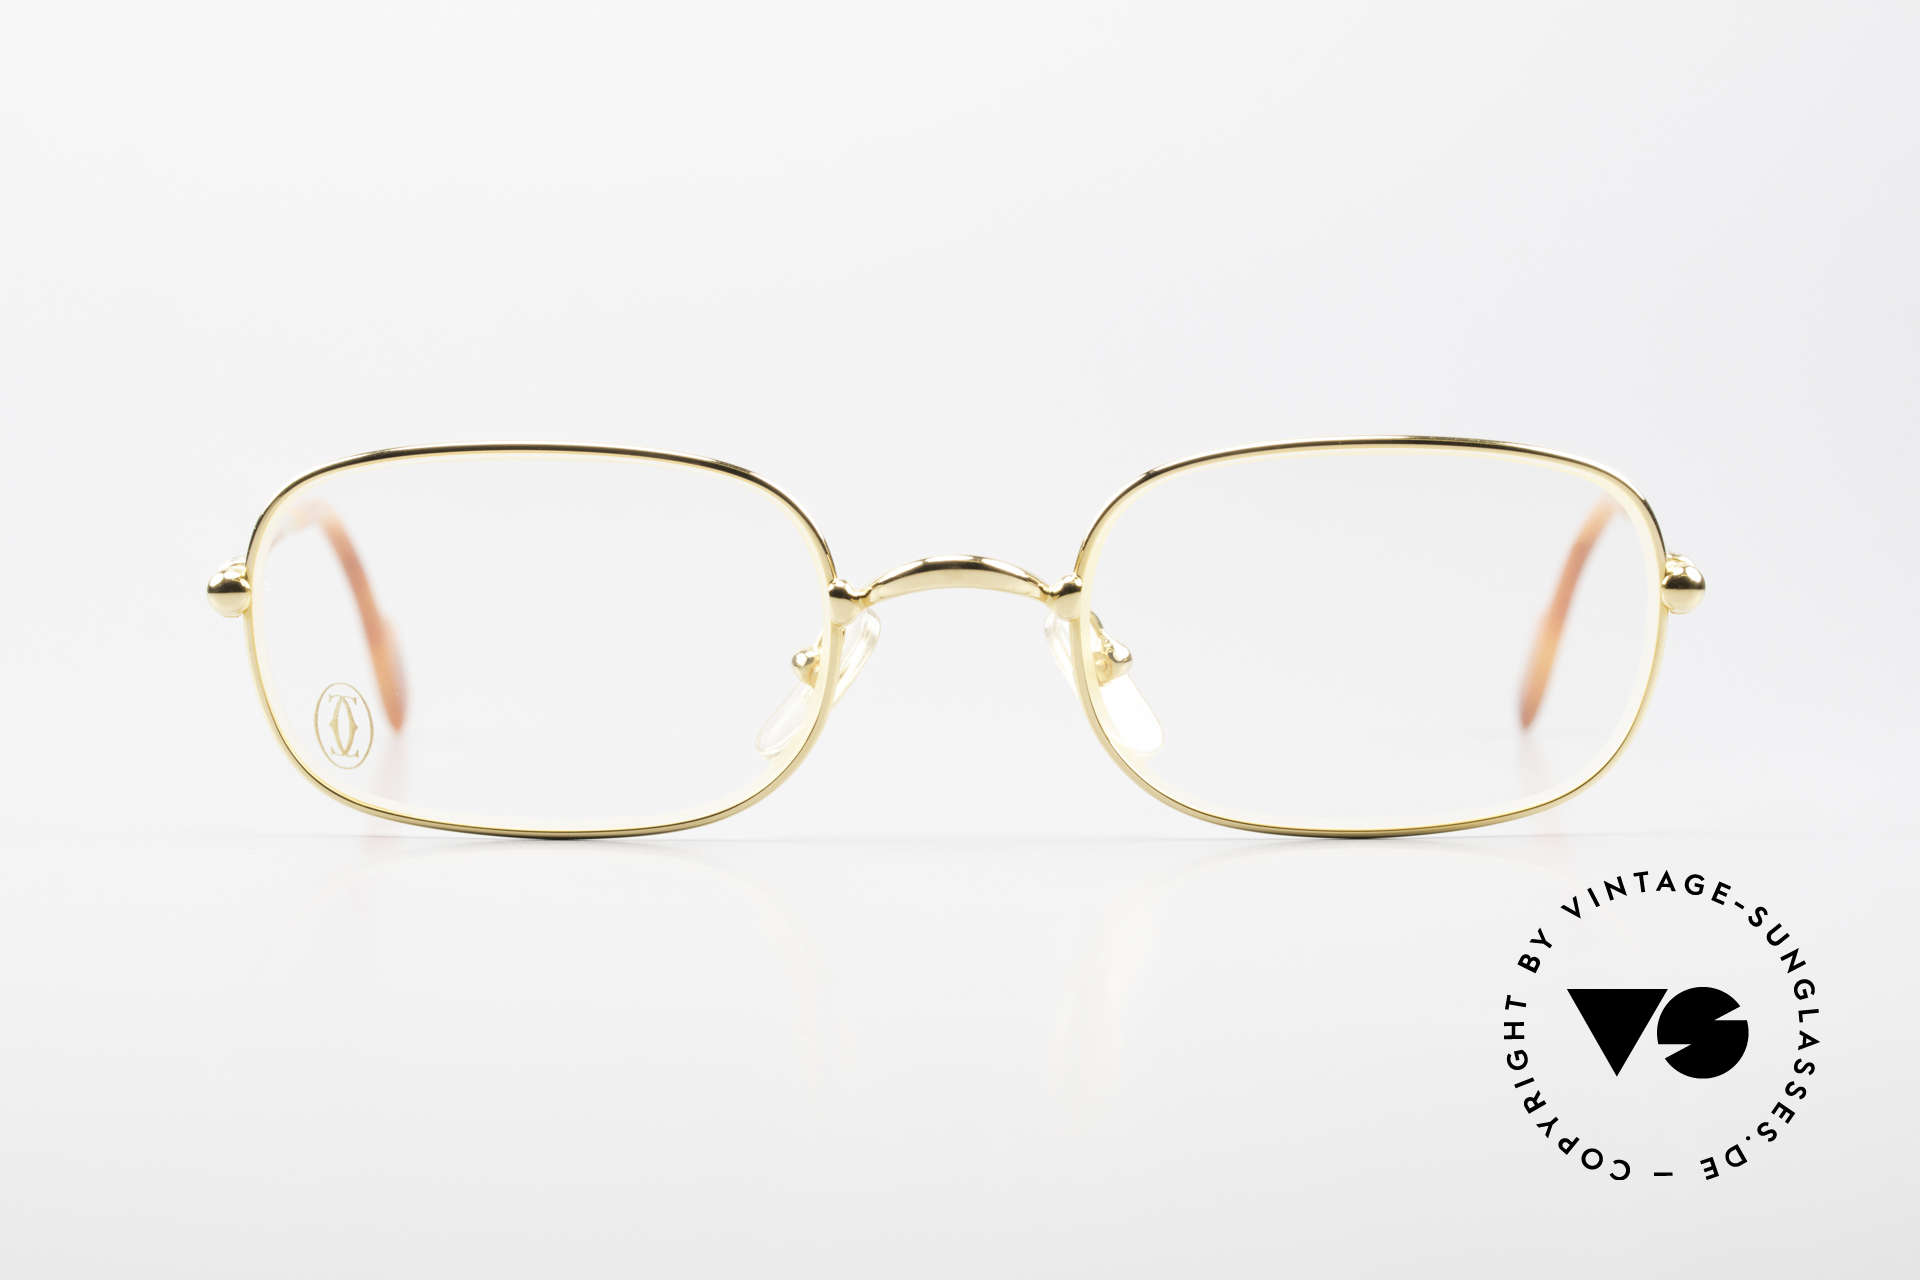 Cartier Deimios Rare Luxury Eyeglasses 90's, Deimios = model of the Cartier 'Thin Rim' Collection, Made for Men and Women